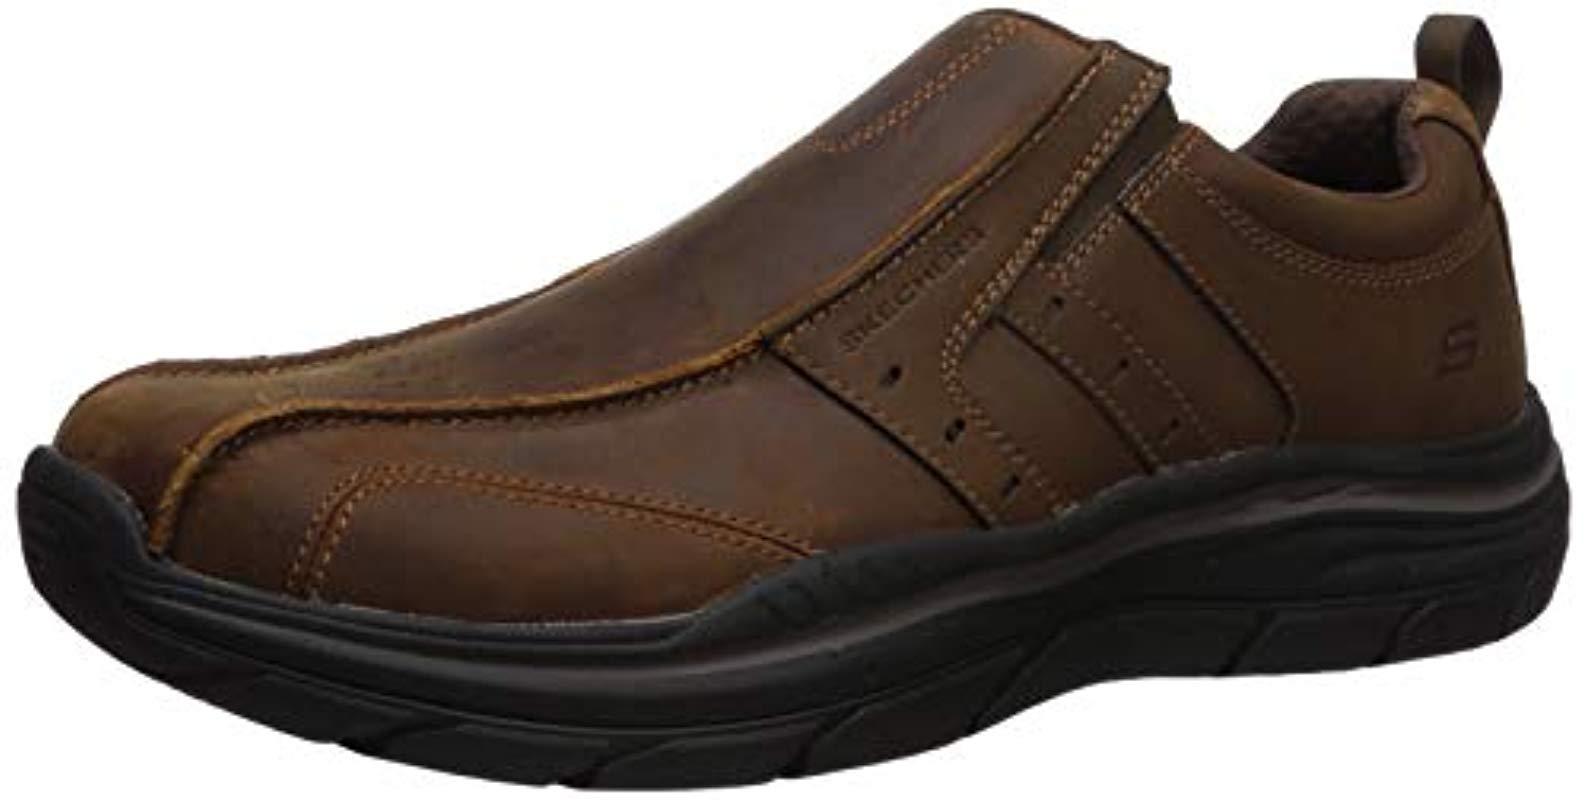 Skechers Expected 2.0-wildon Leather Slip On Moccasin in Brown for Men ...